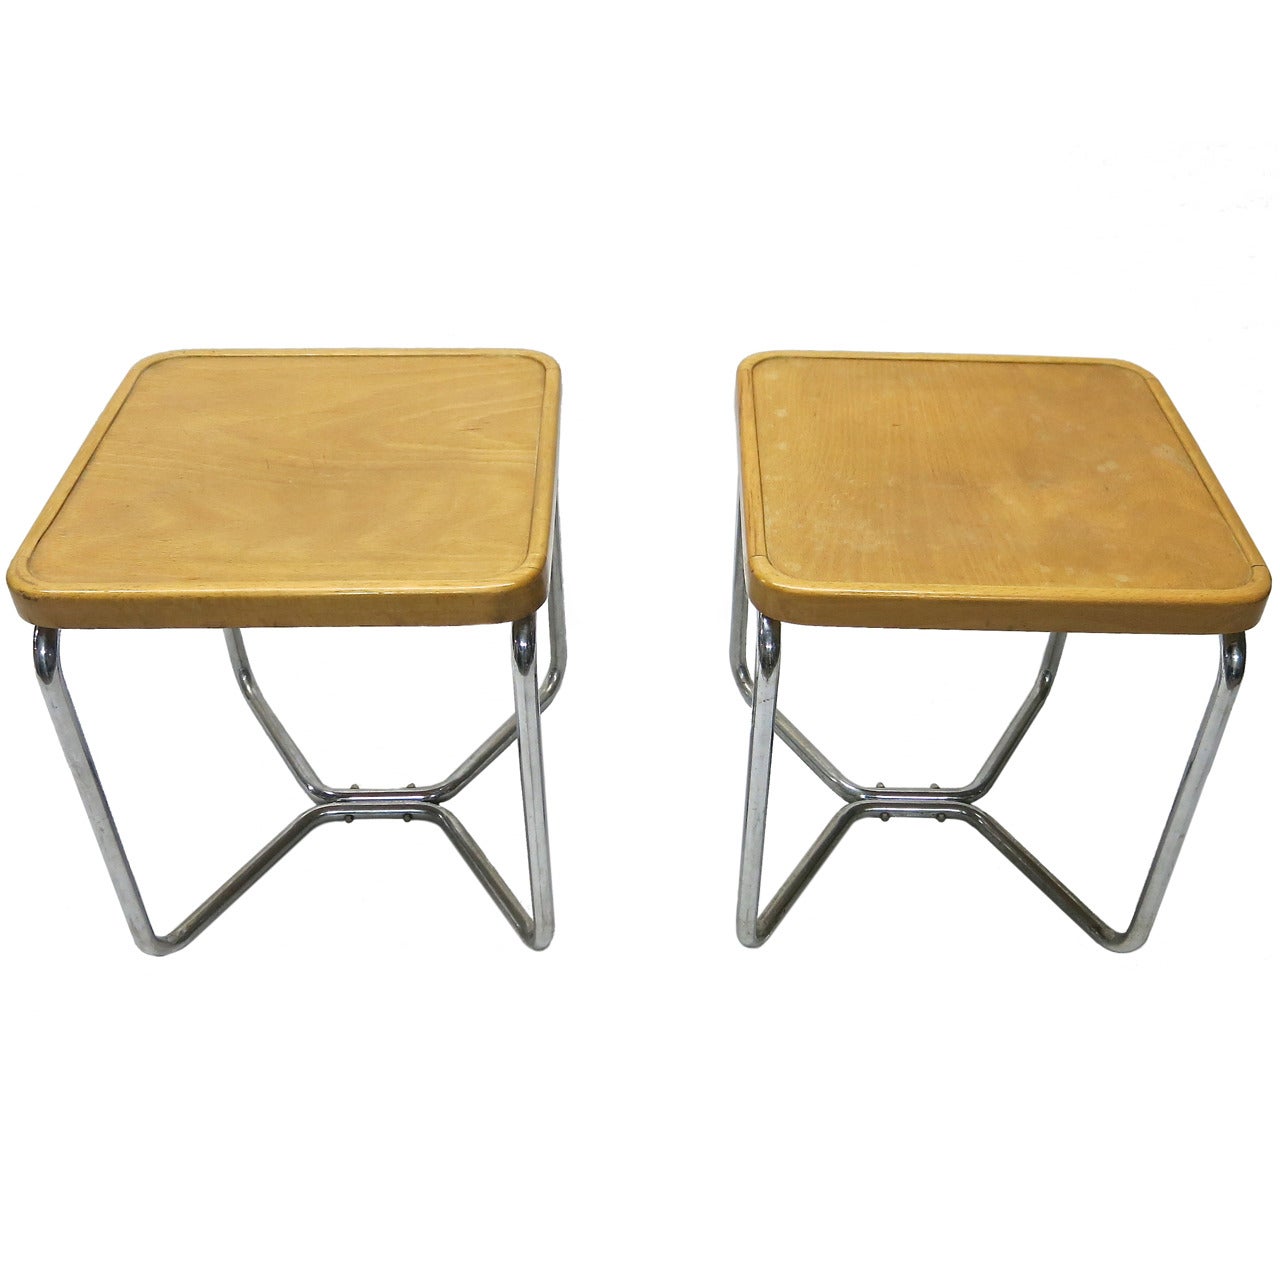 Pair of B53 Stools by Marcel Breuer Germany, circa 1940